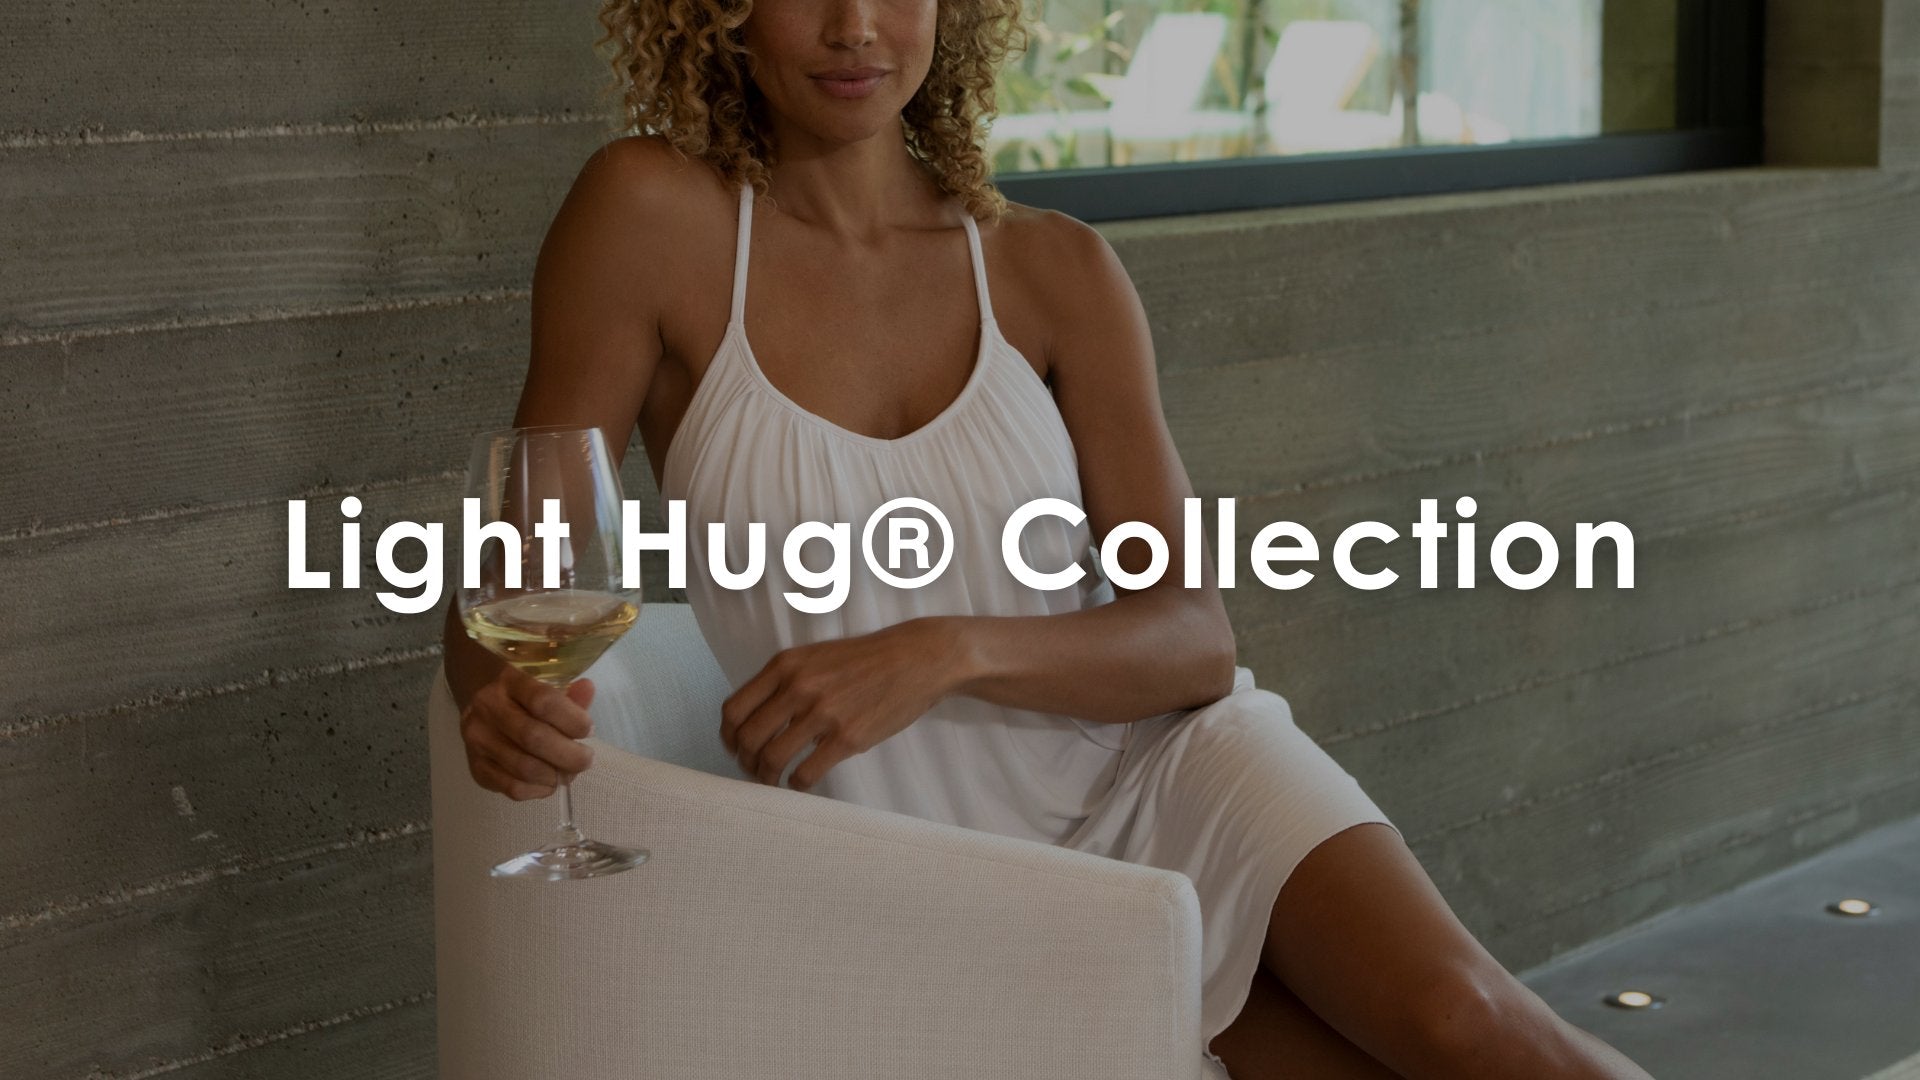 The Jjwinks Light Hug Collection, Shop all Bra-free tops and loungewear